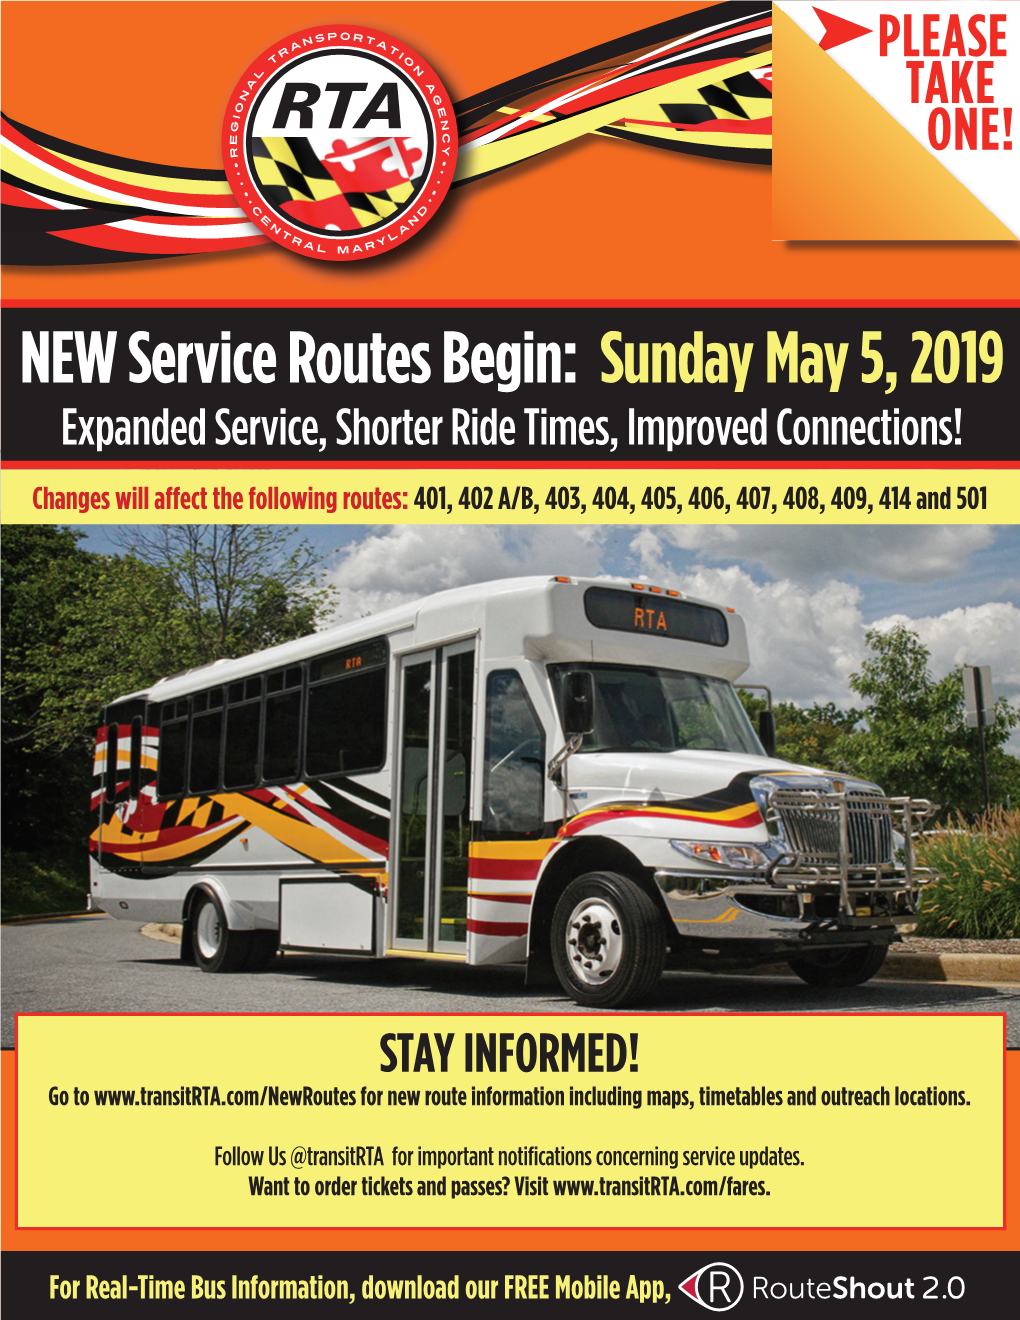 NEW Service Routes Begin: Sunday May 5, 2019